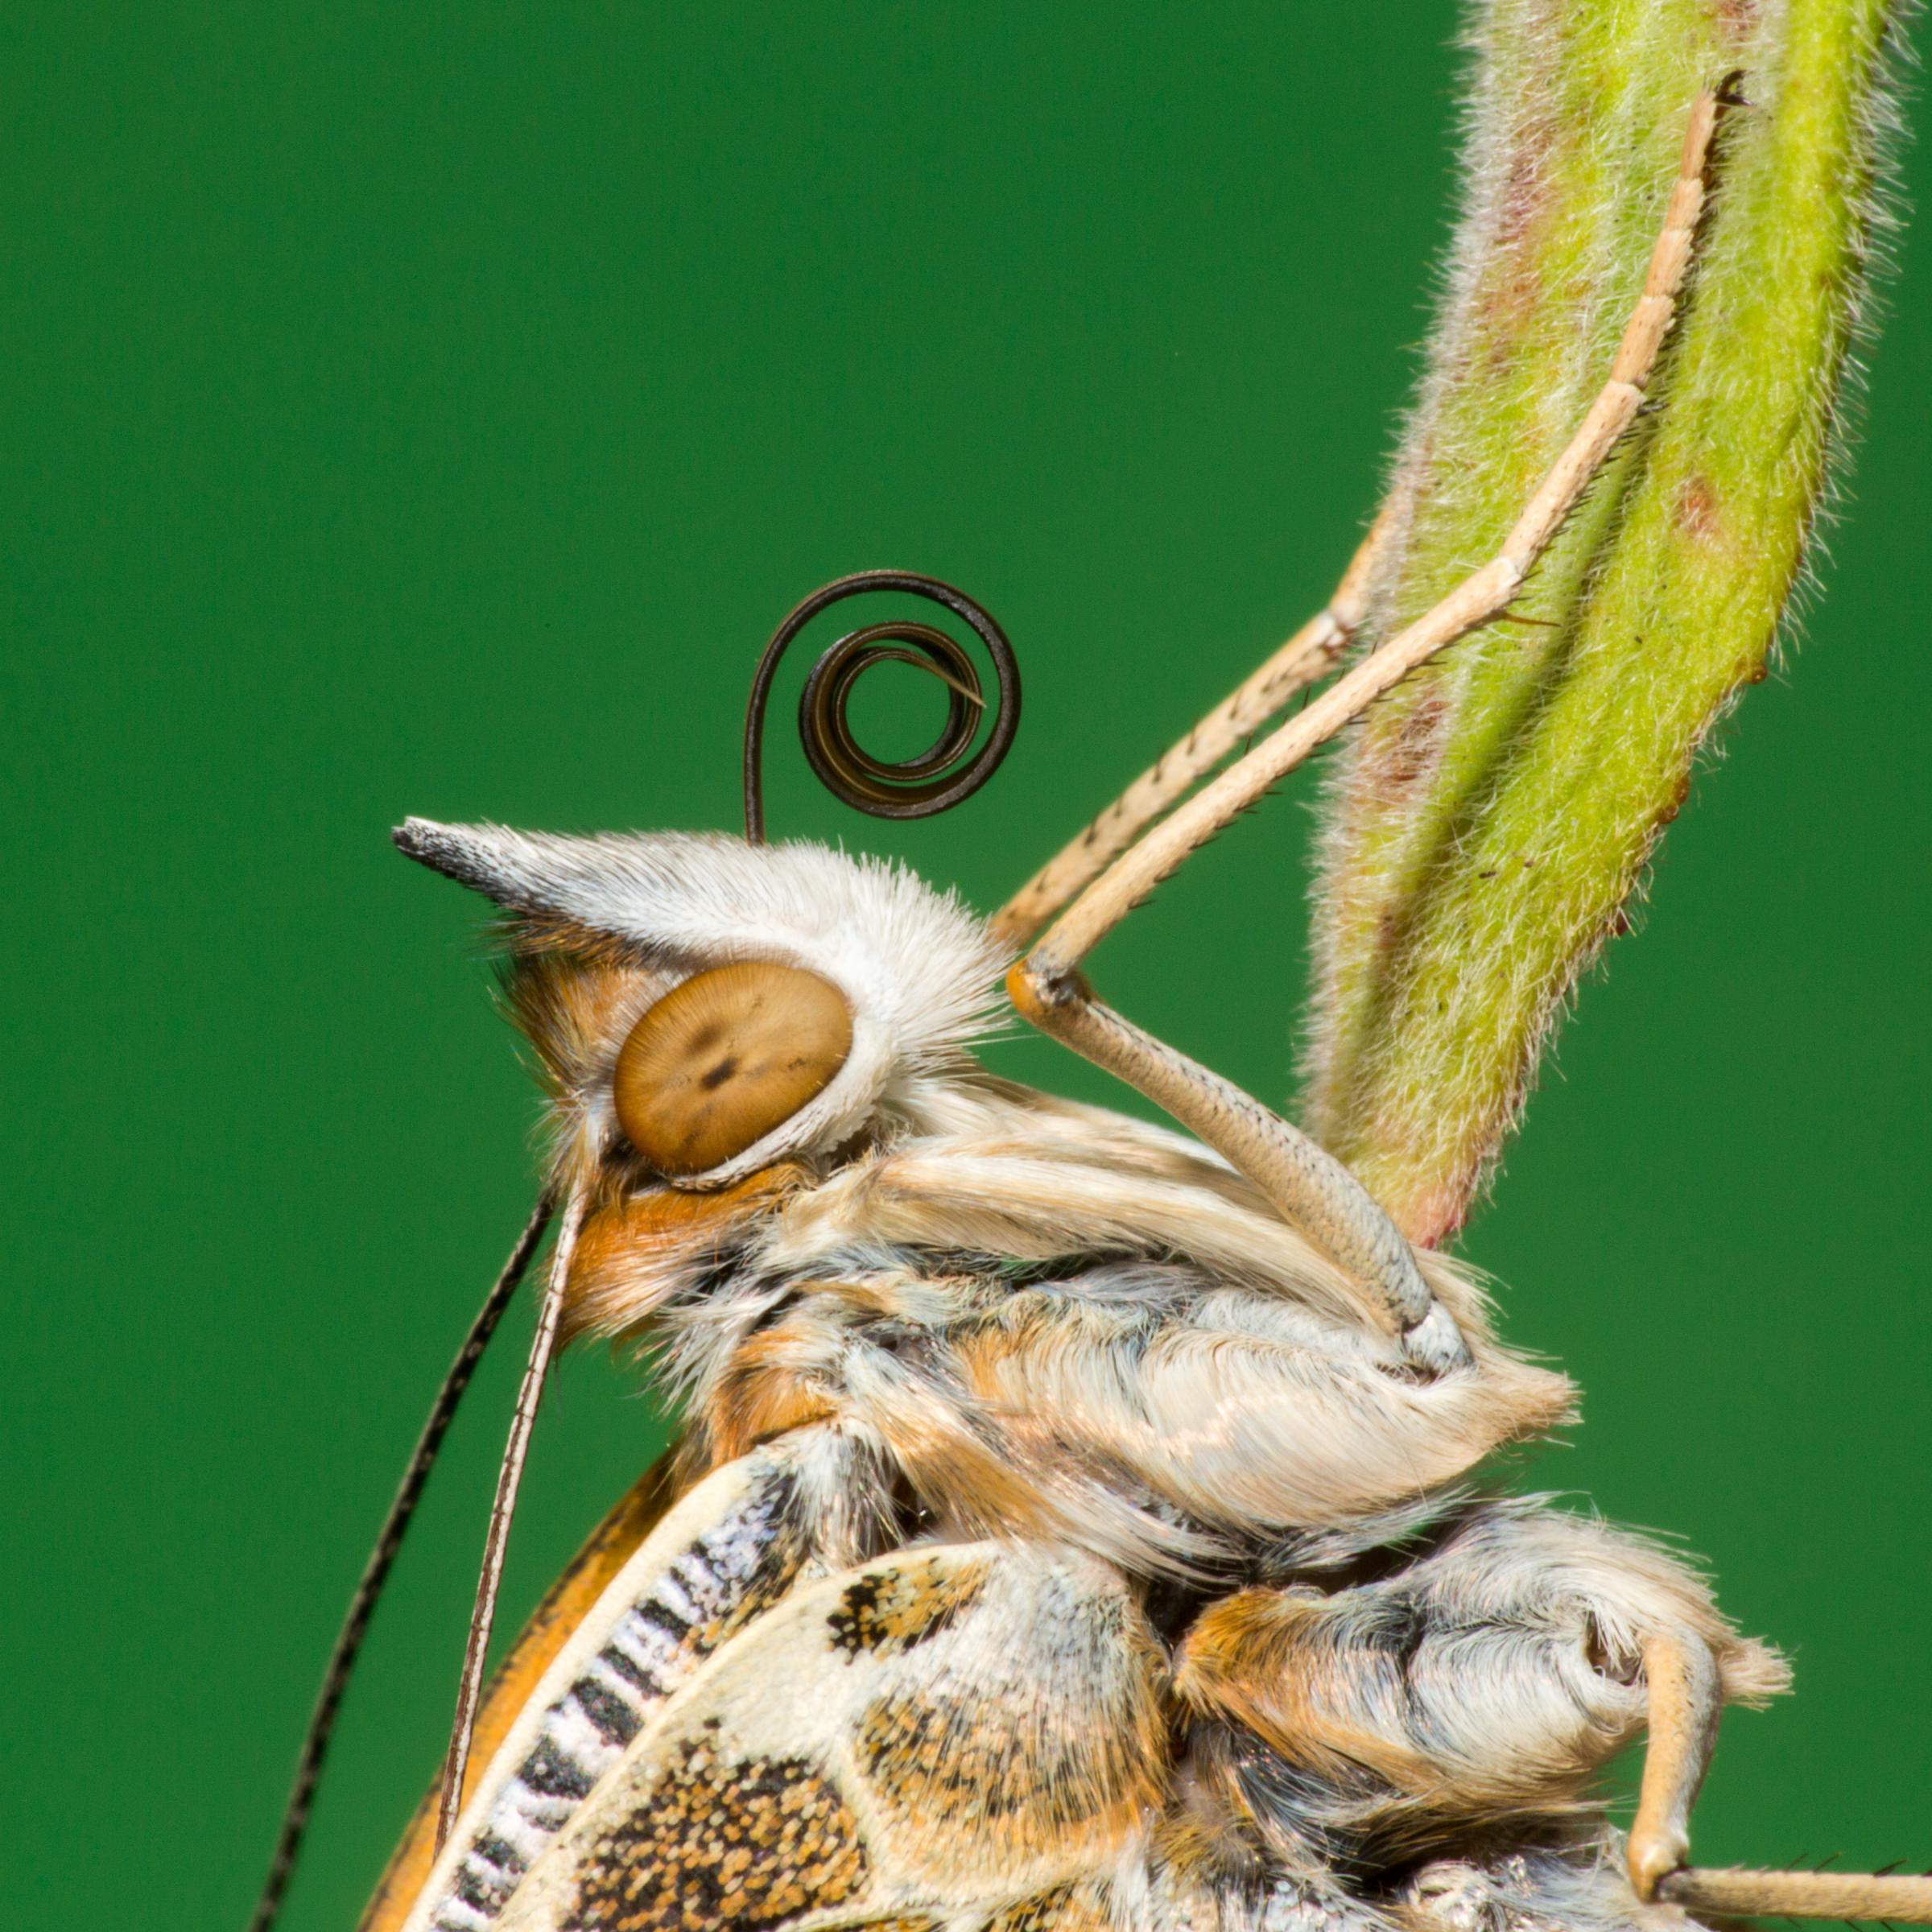 A newly emerged Painted Lady butterfly showing the two halves of its proboscis